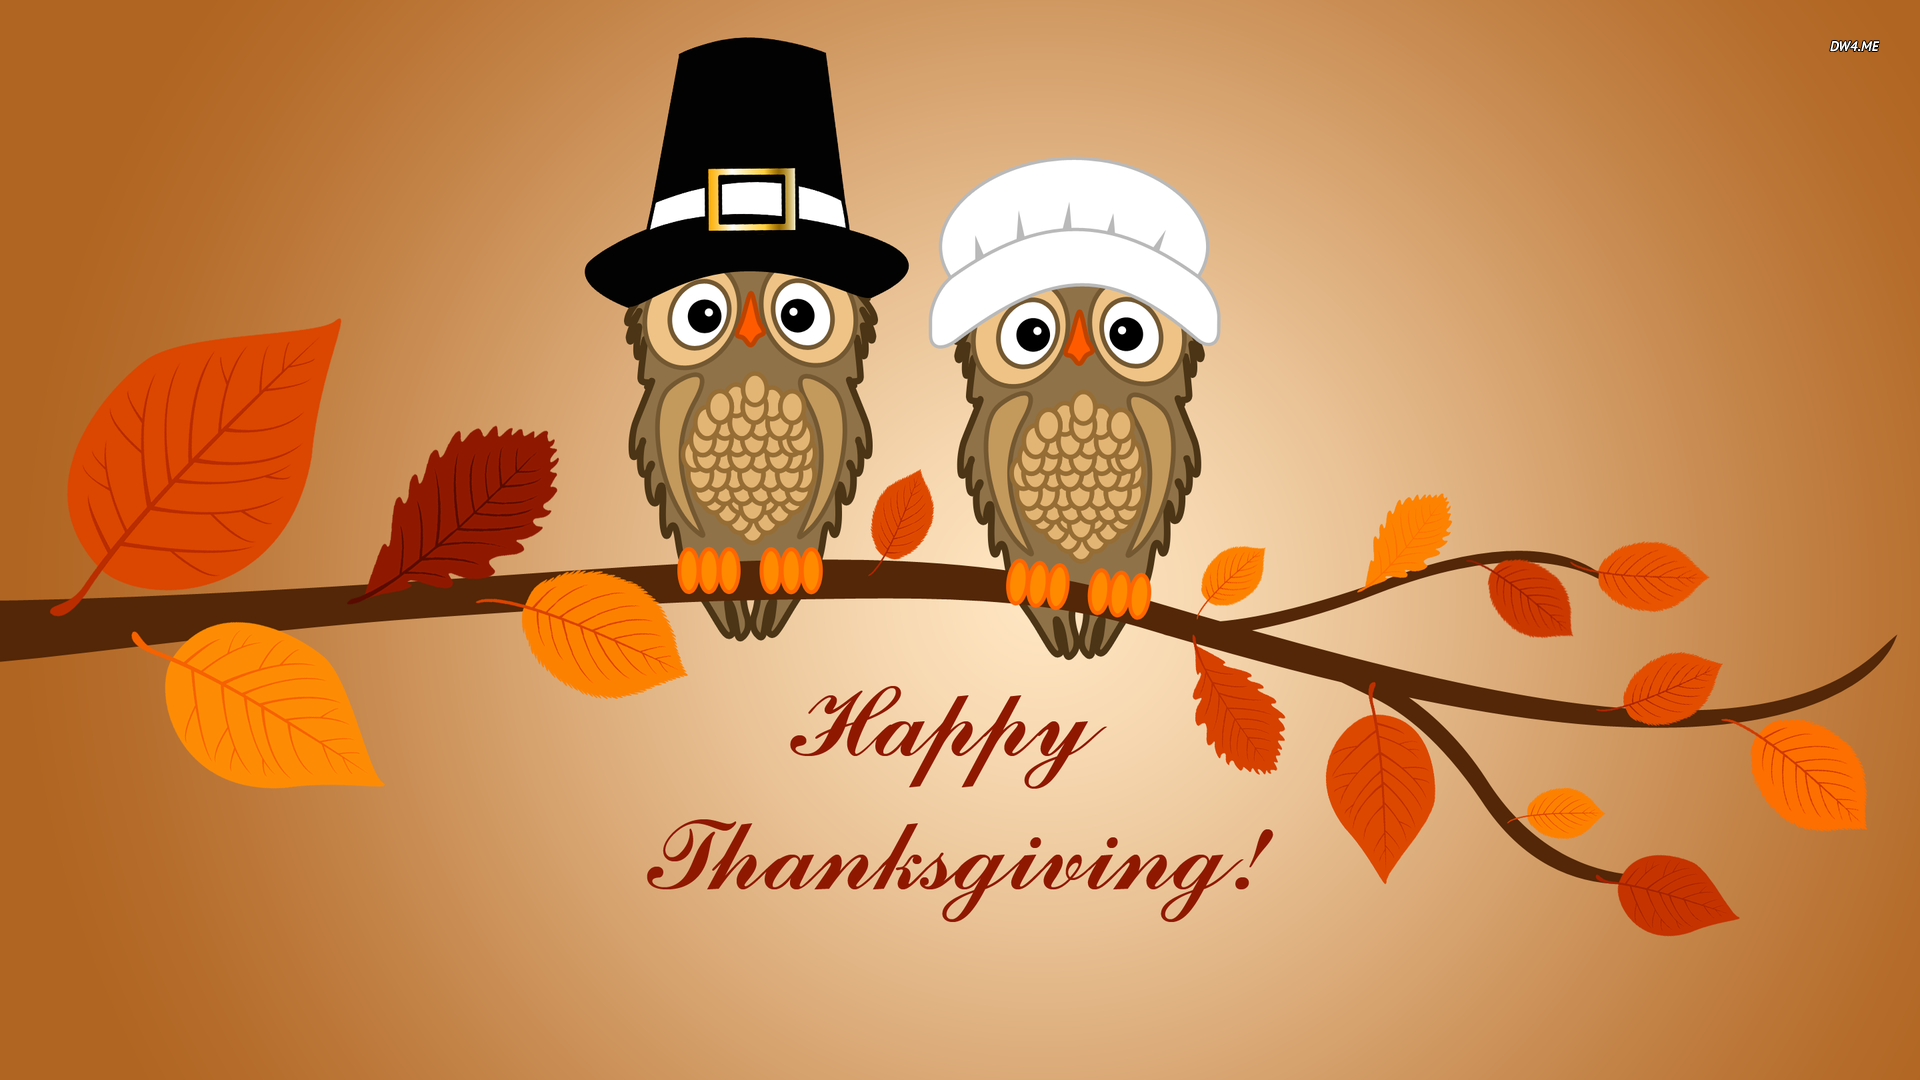 Thanksgiving Wallpapers For Sharing With